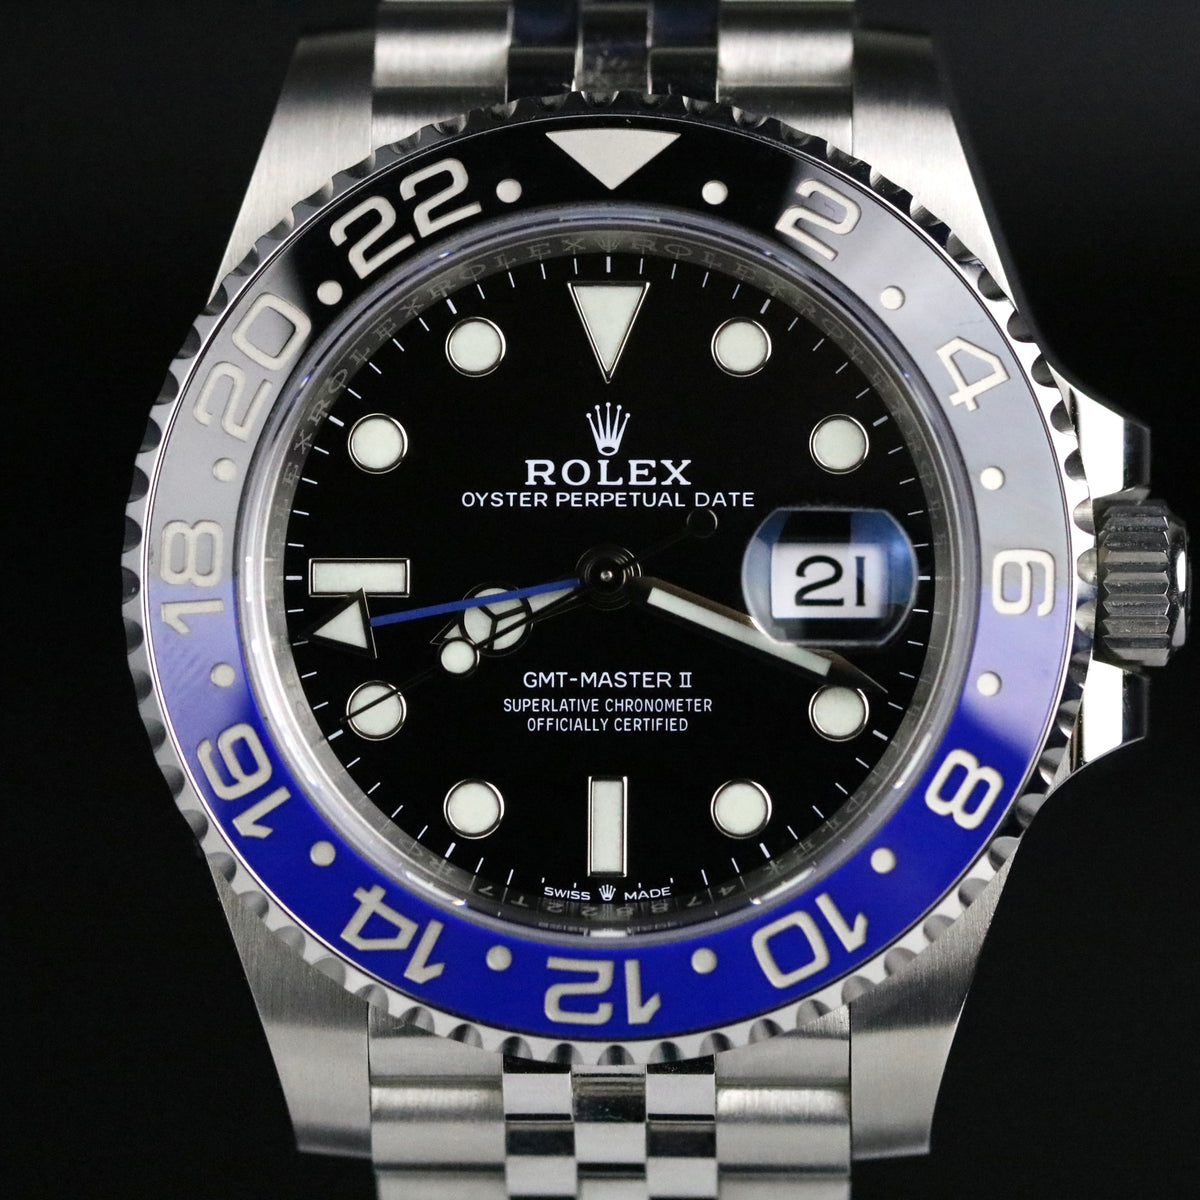 2020 Rolex 126710BLNR GMT-MASTER II Batgirl with Box & Papers